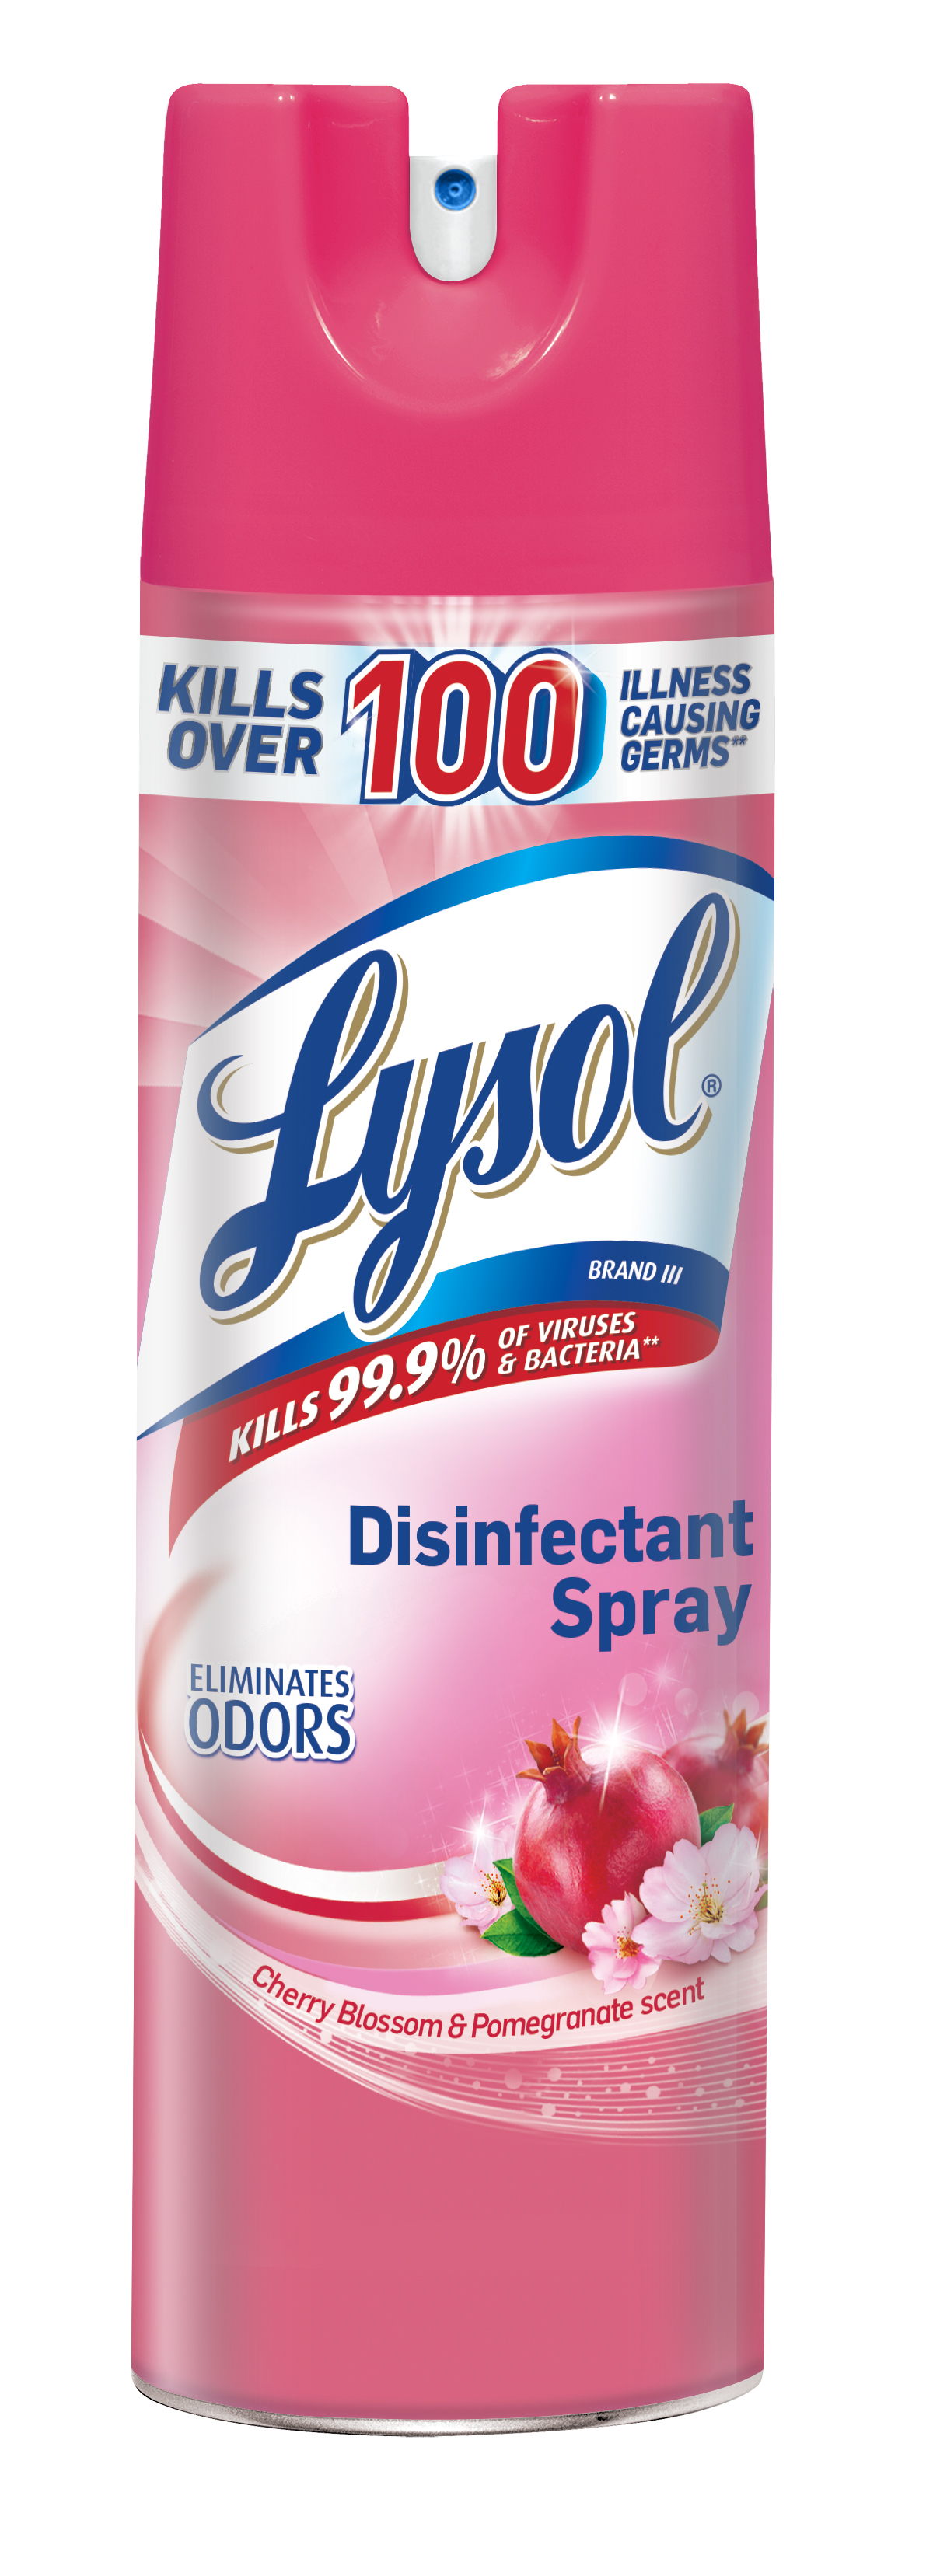 LYSOL Disinfectant Spray  Cherry Blossoms  Pomegranate